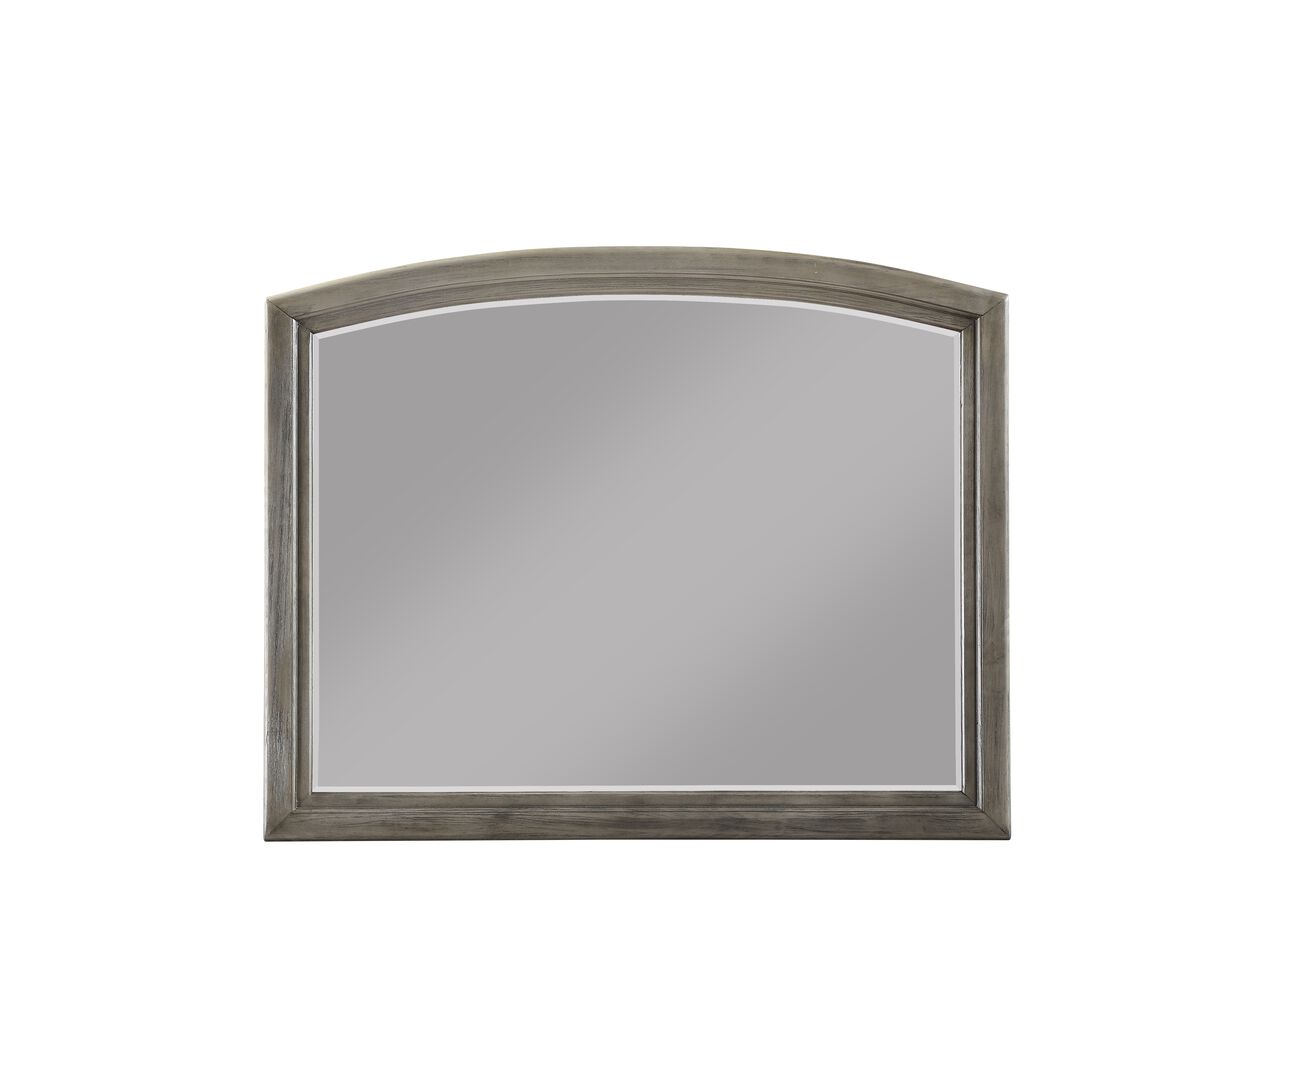 Transitional Style Wooden Decorative Mirror with Arched Top, Gray